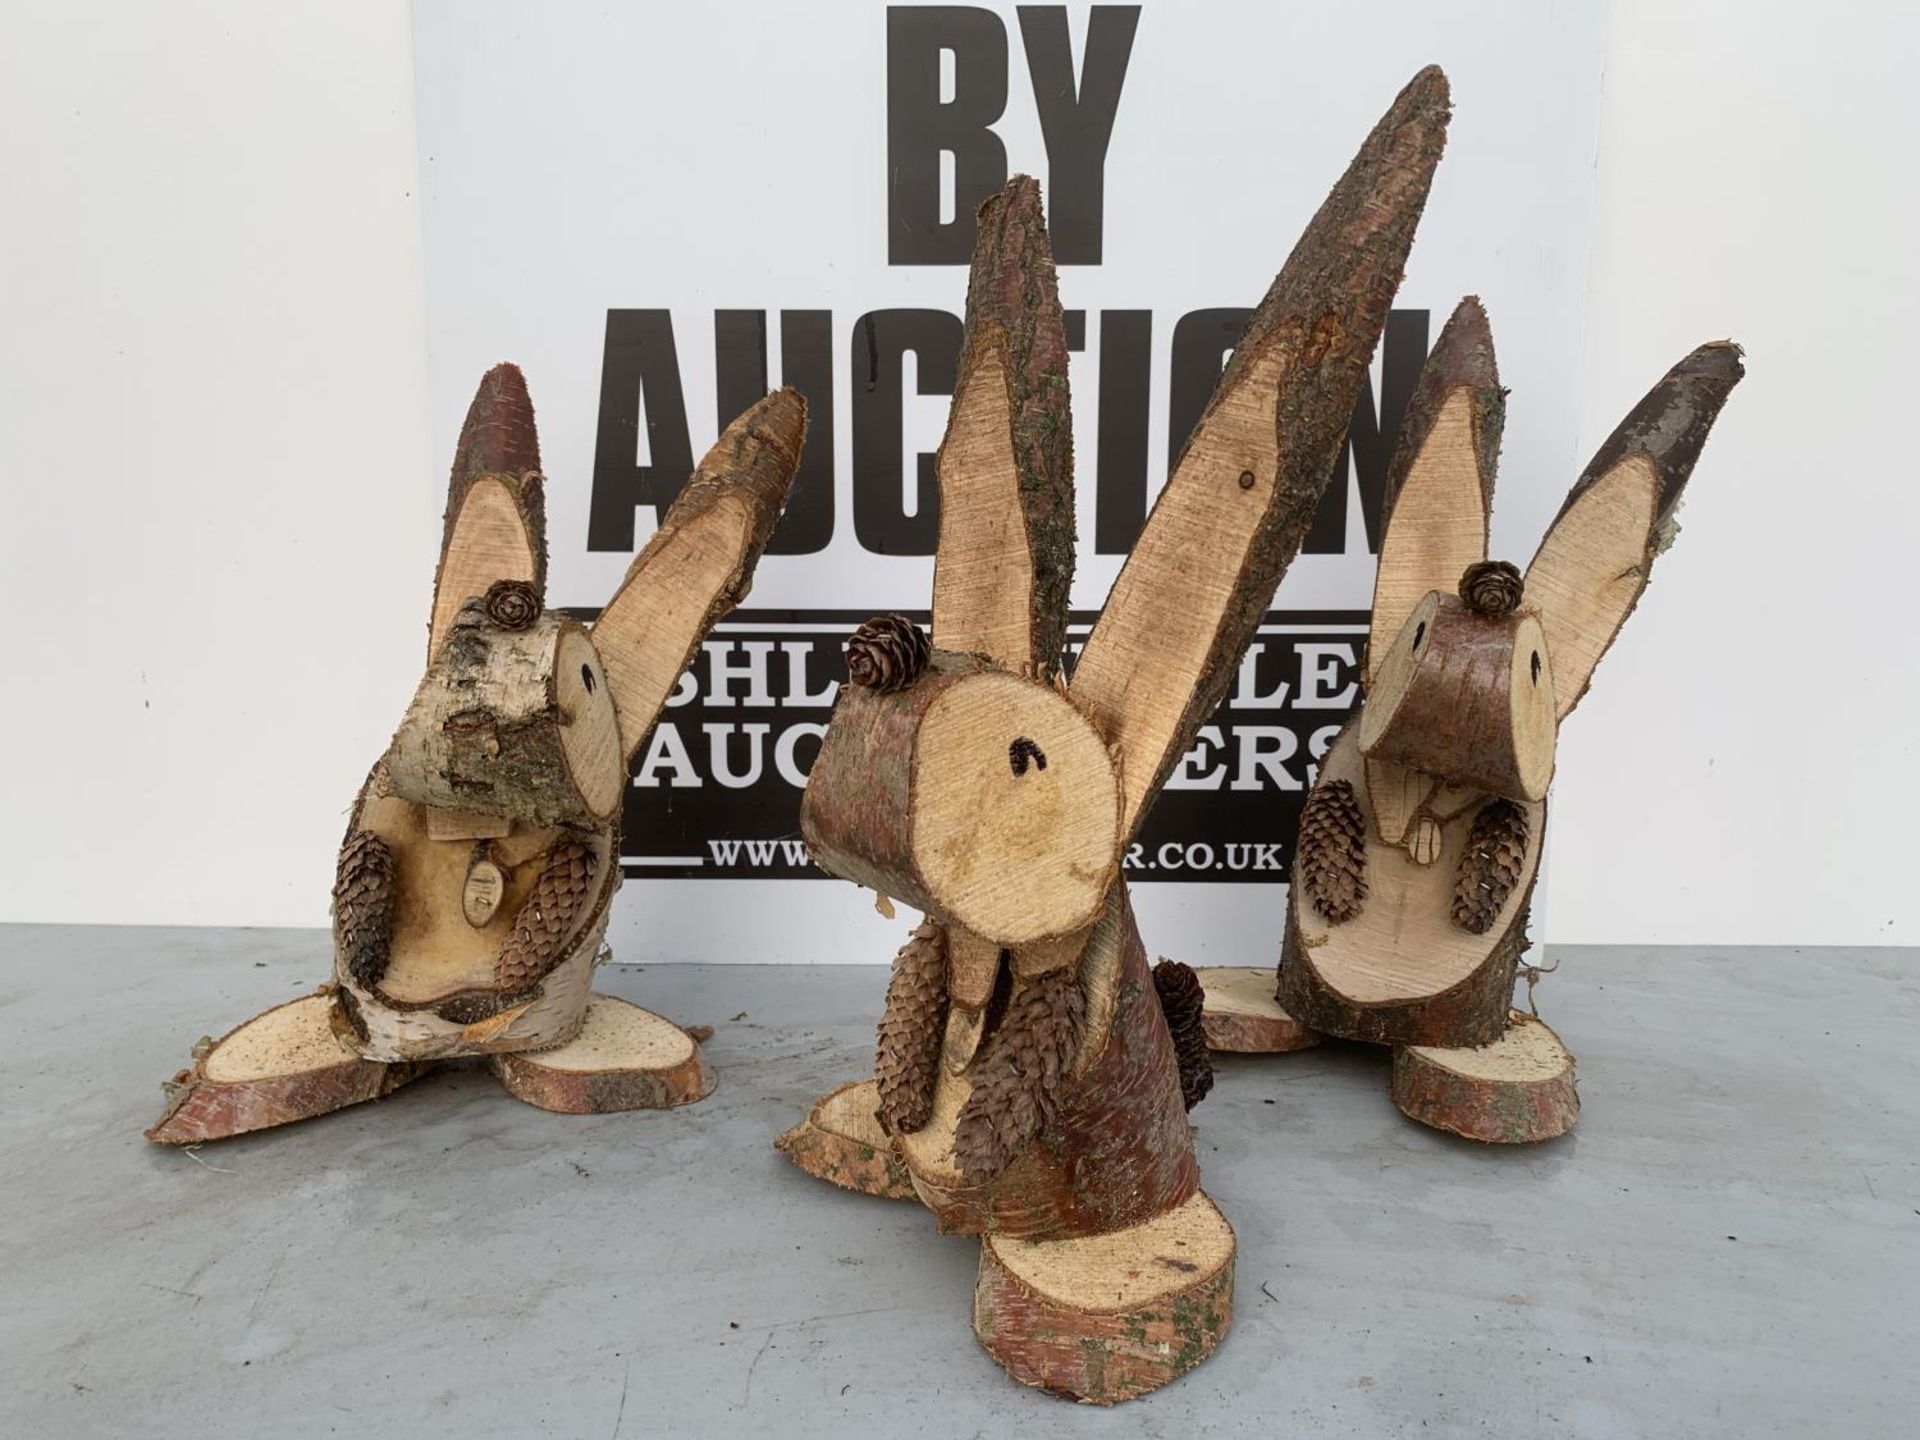 THREE RABBIT FIGURES MADE FROM LOGS + VAT TO BE SOLD FOR THE THREE